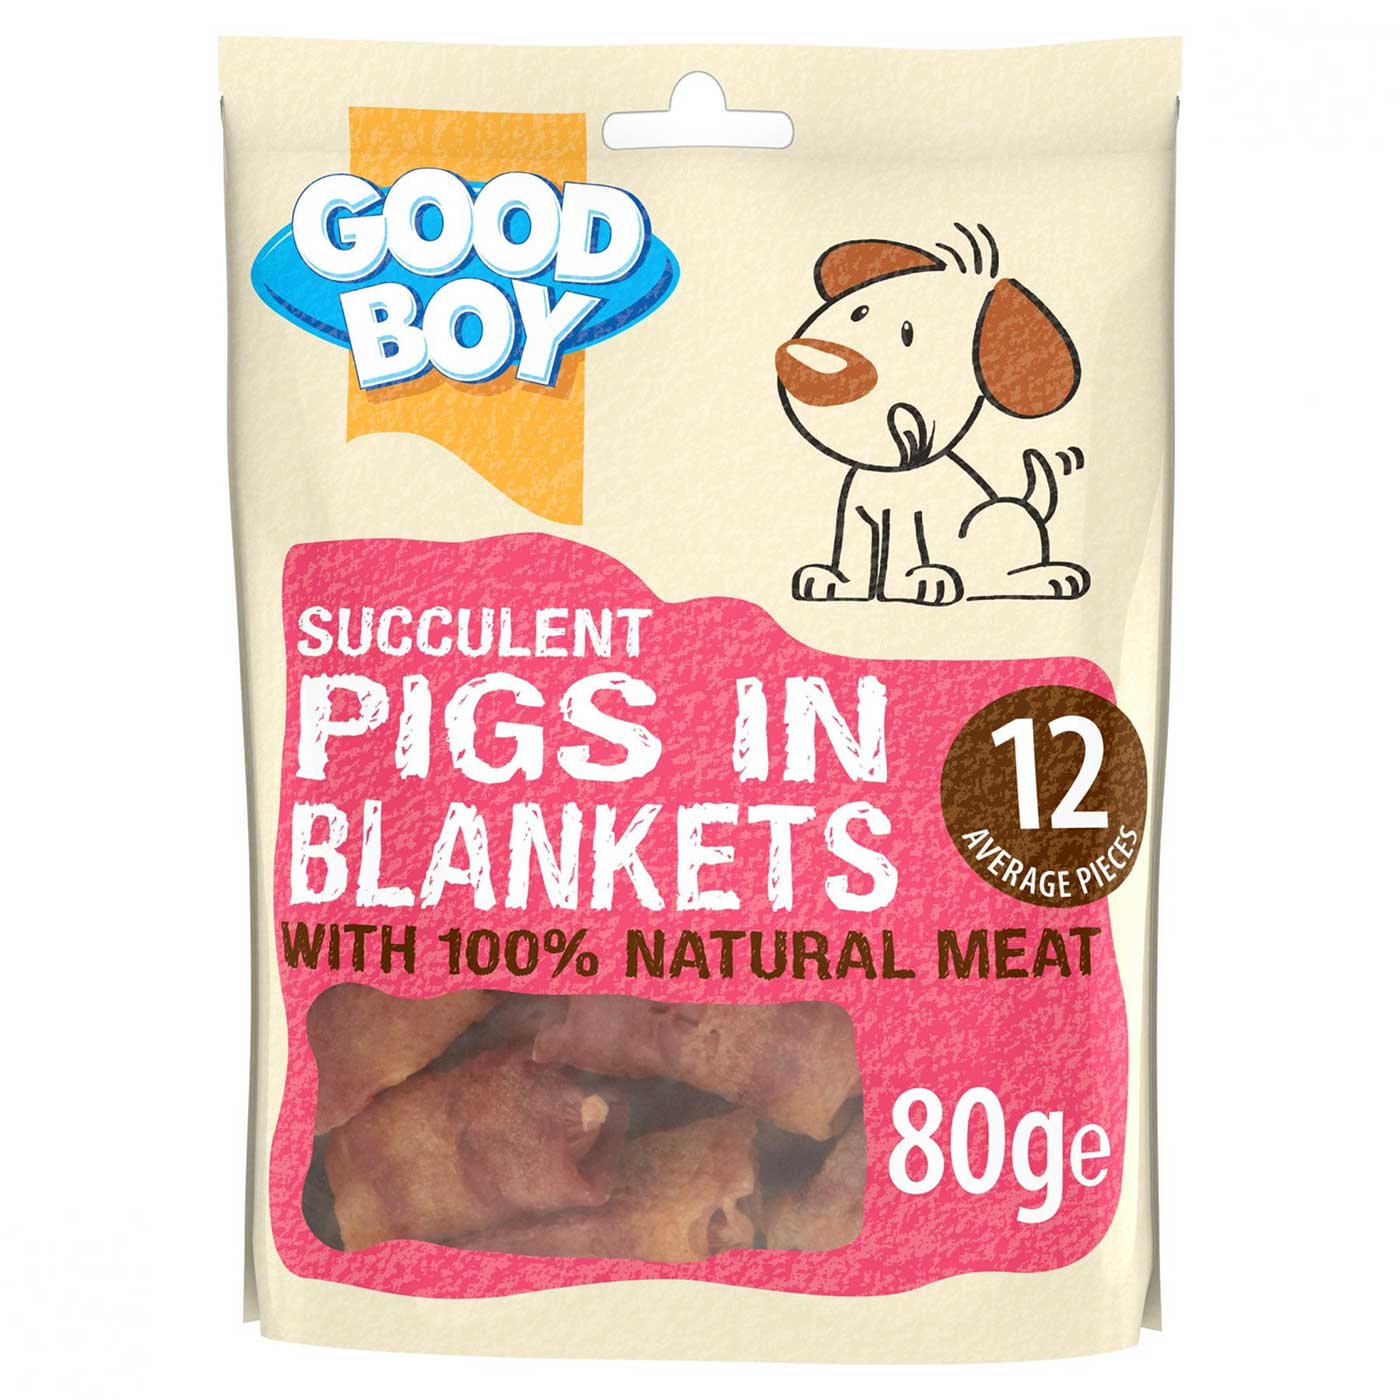 Good Boy Succulent Pigs In Blankets